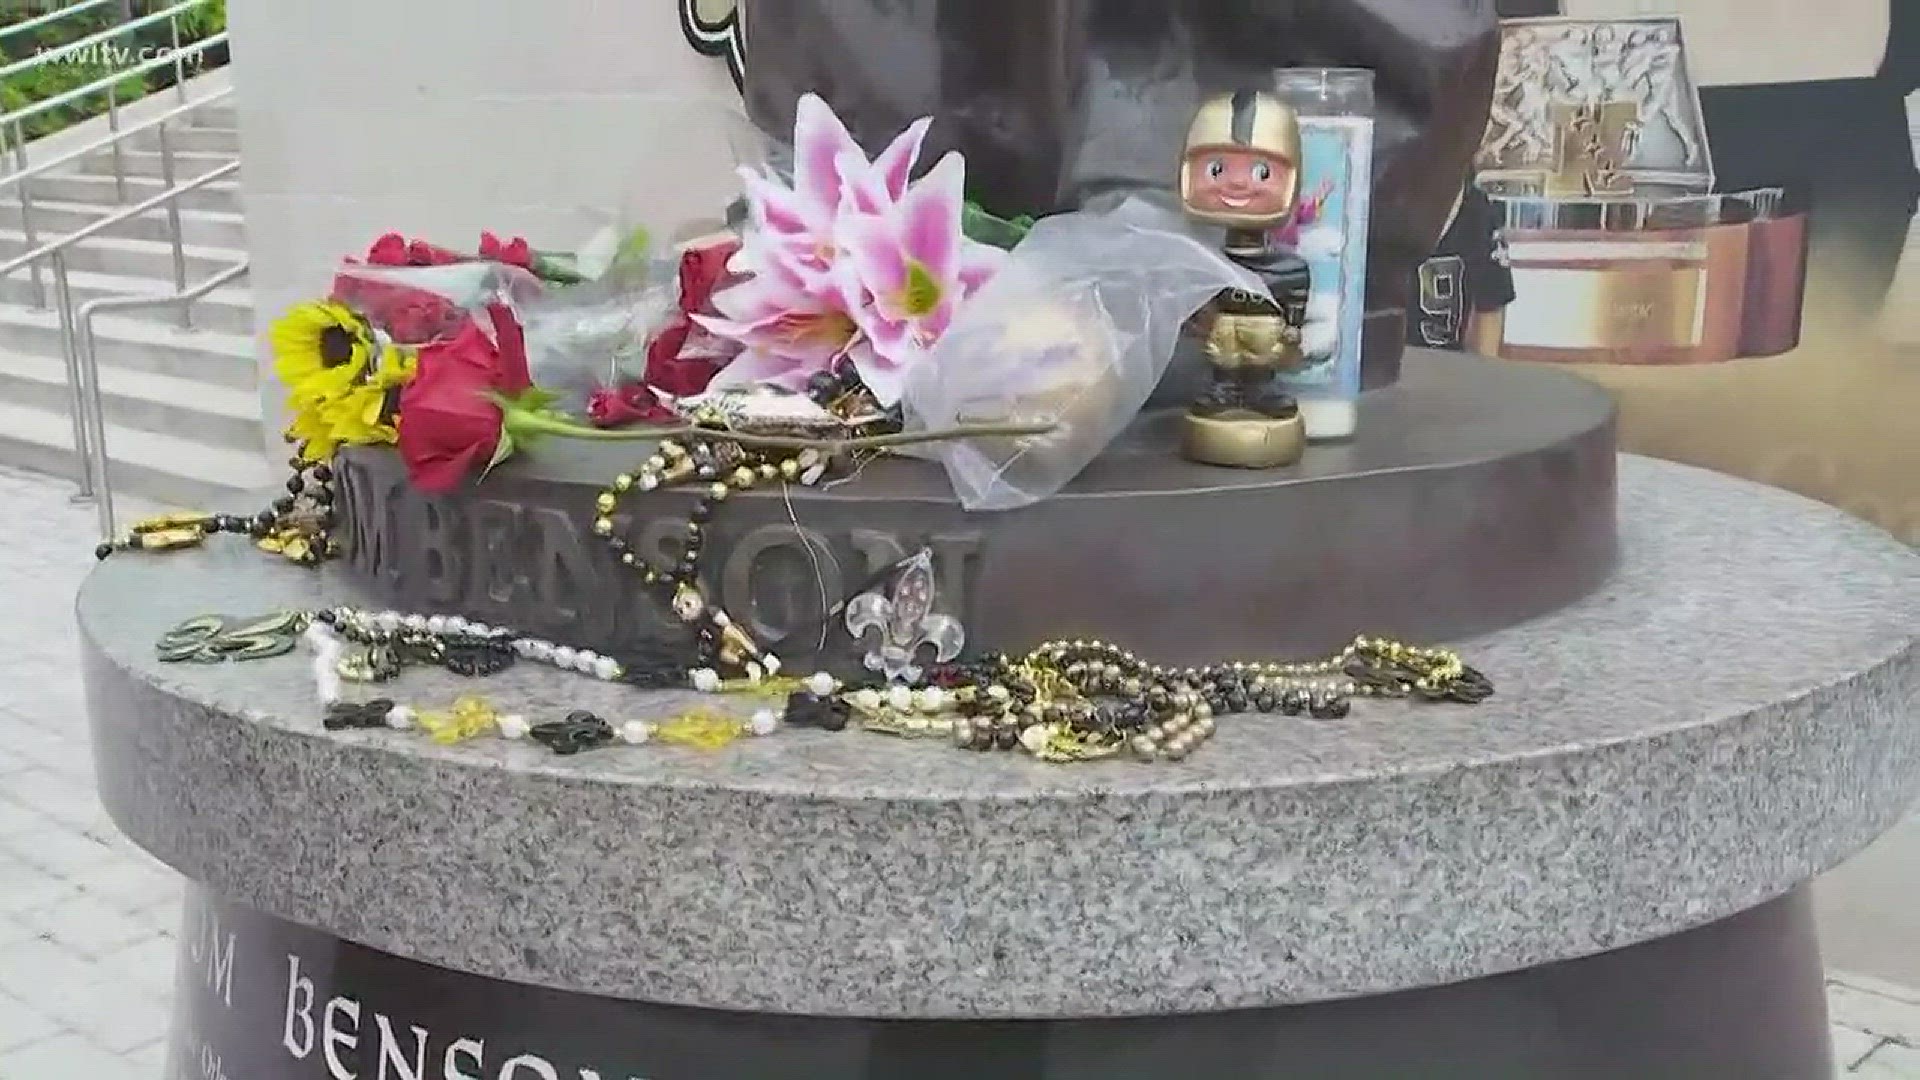 Fans came out to pay their respects to the late Saints and Pelicans owner.